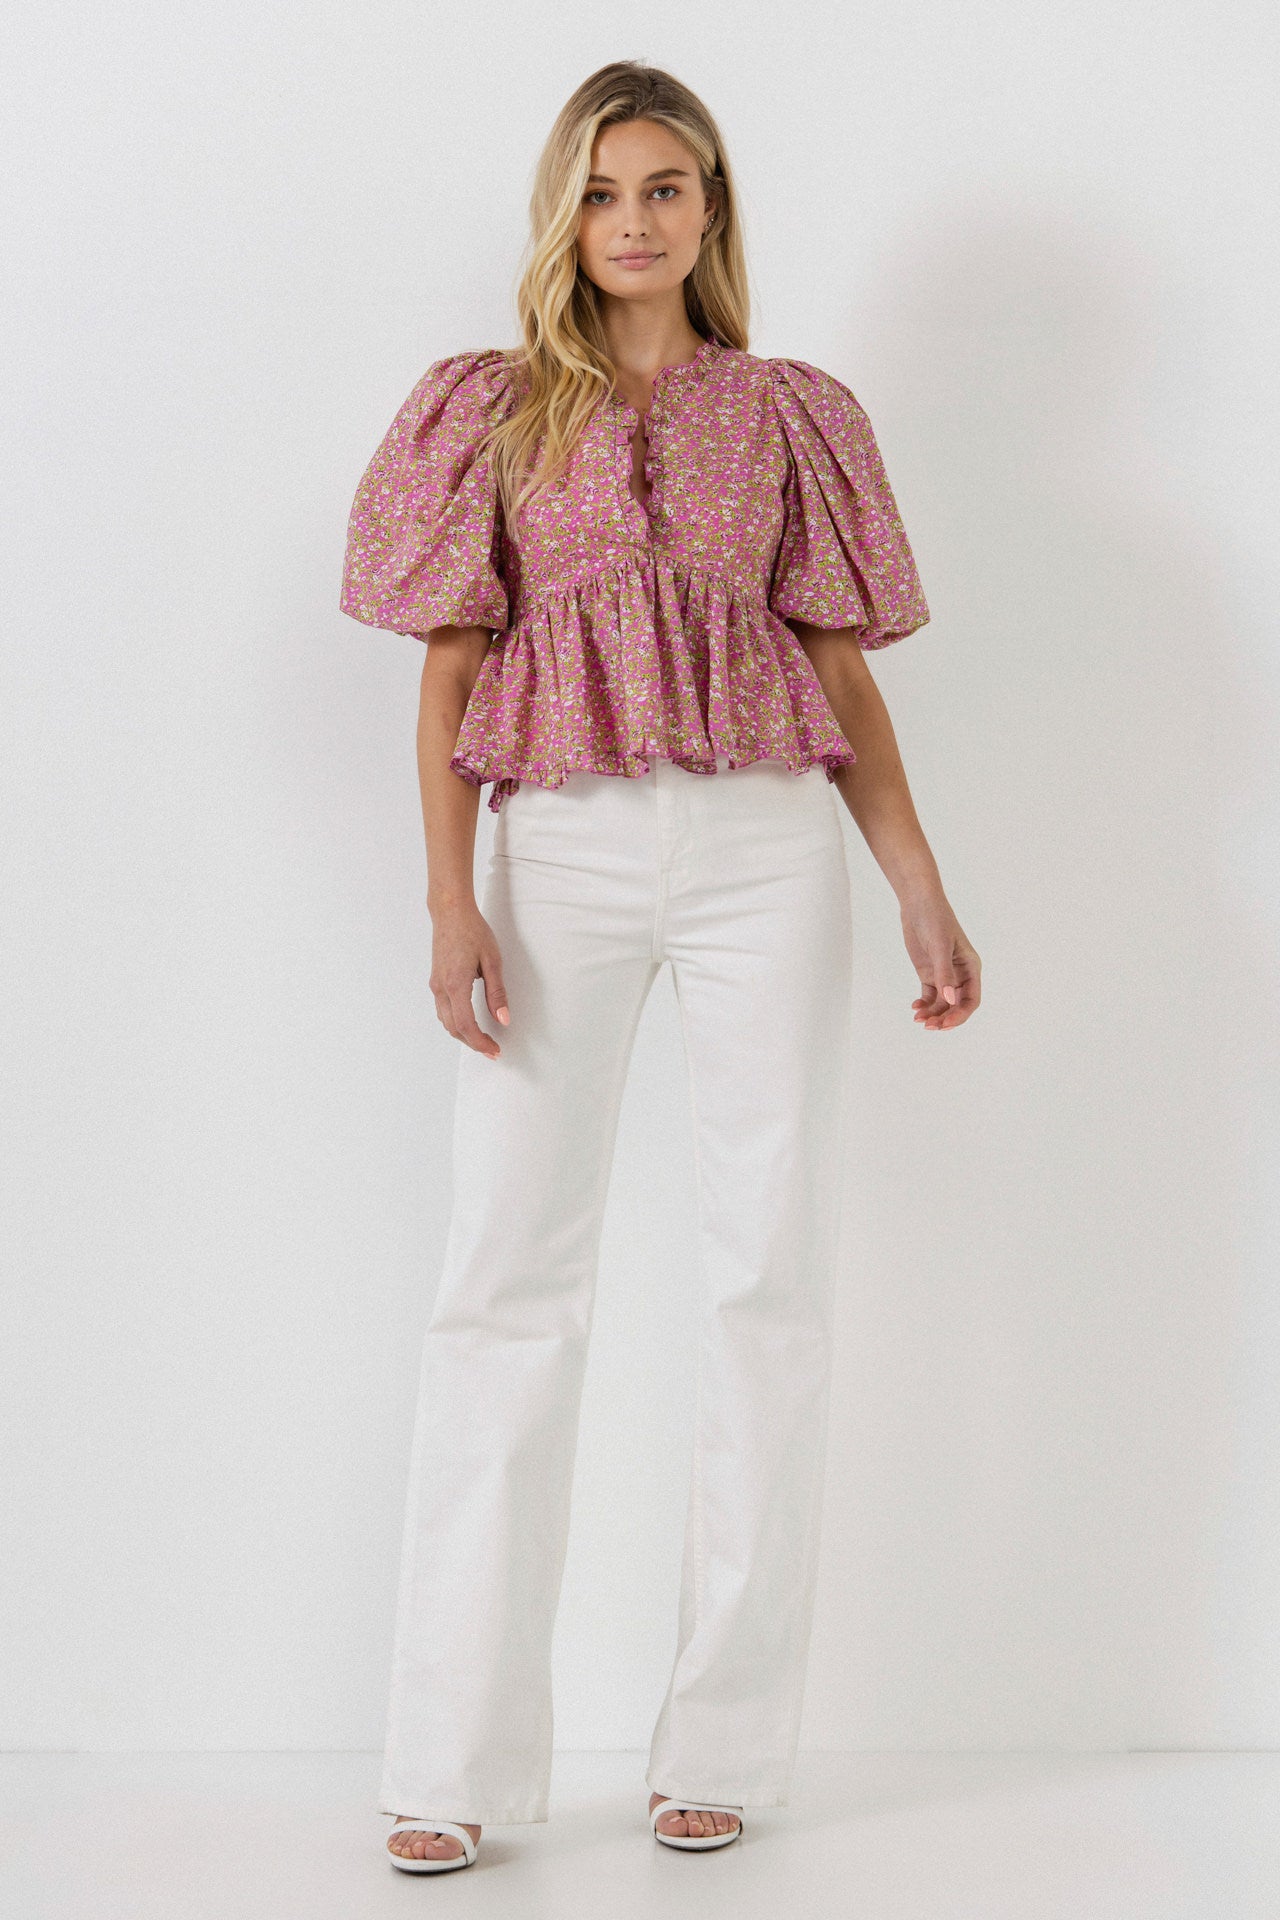 FREE THE ROSES - Puff Sleeve Ruffled V Blouse - TOPS available at Objectrare